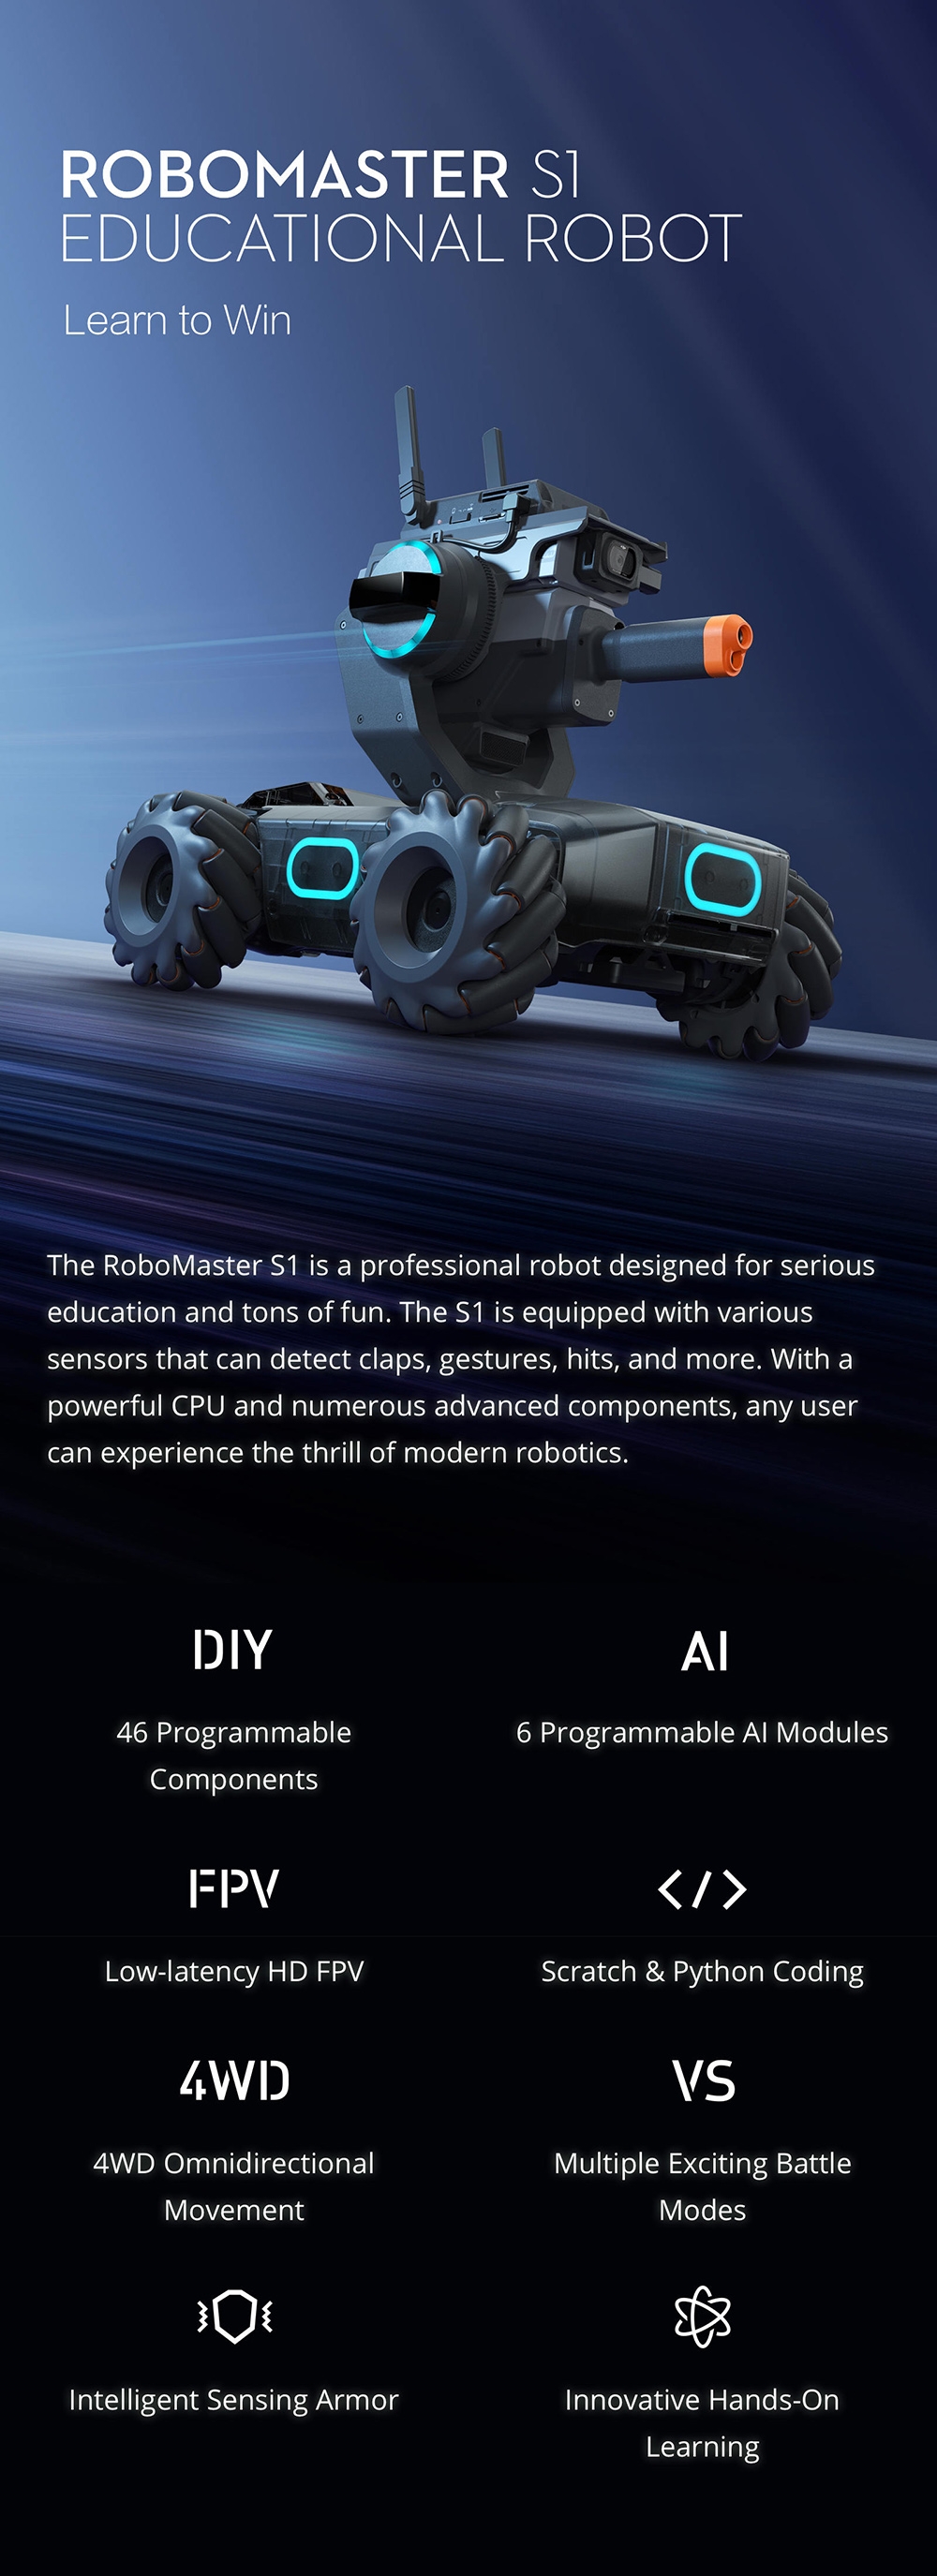 DJI Robomaster S1 STEAM DIY 4WD Brushless HD FPV APP Control Intelligent Educational Robot With AI Modules Support Scratch 3.0 Python Program